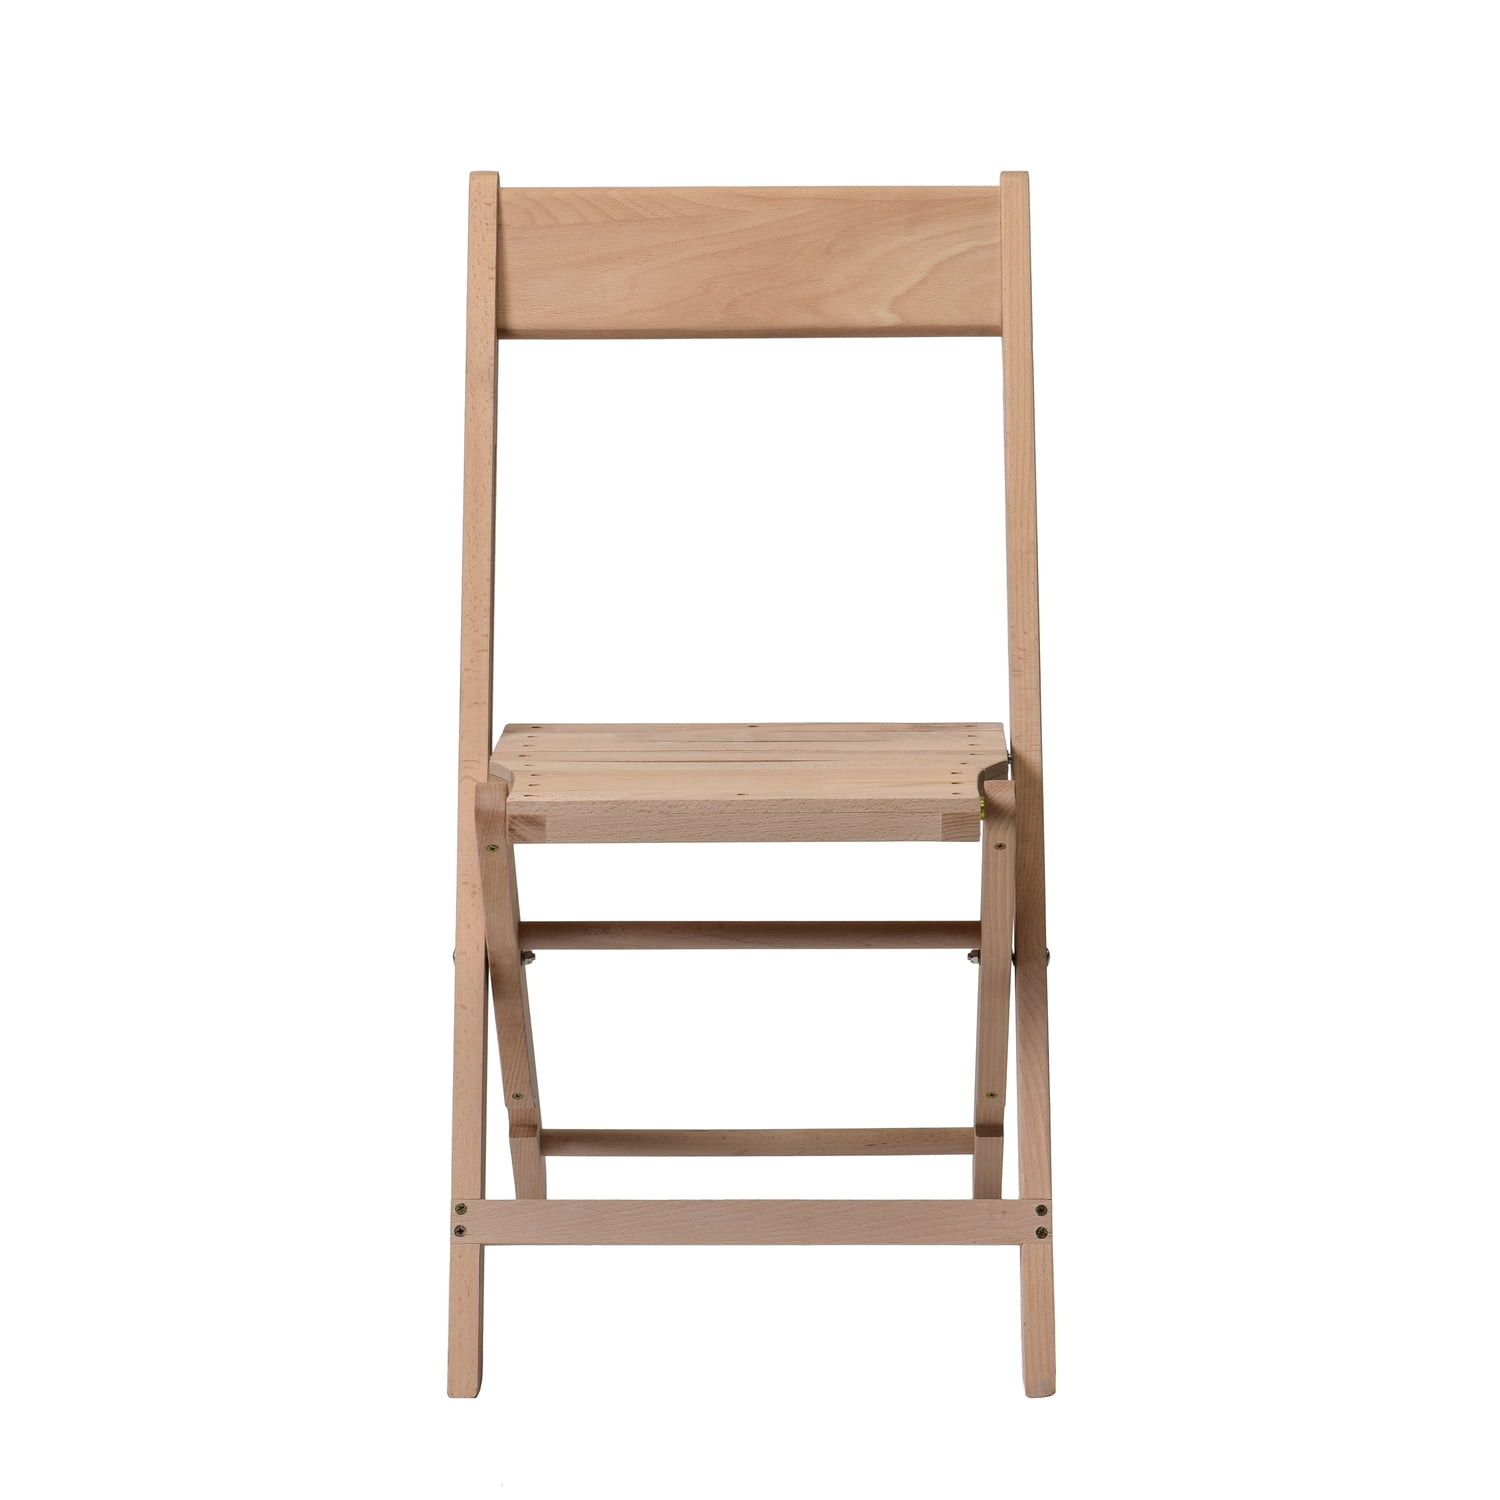 A-101-na-4 American Classic Natural Wood Folding Chair - 30.5 In. - Set Of 4